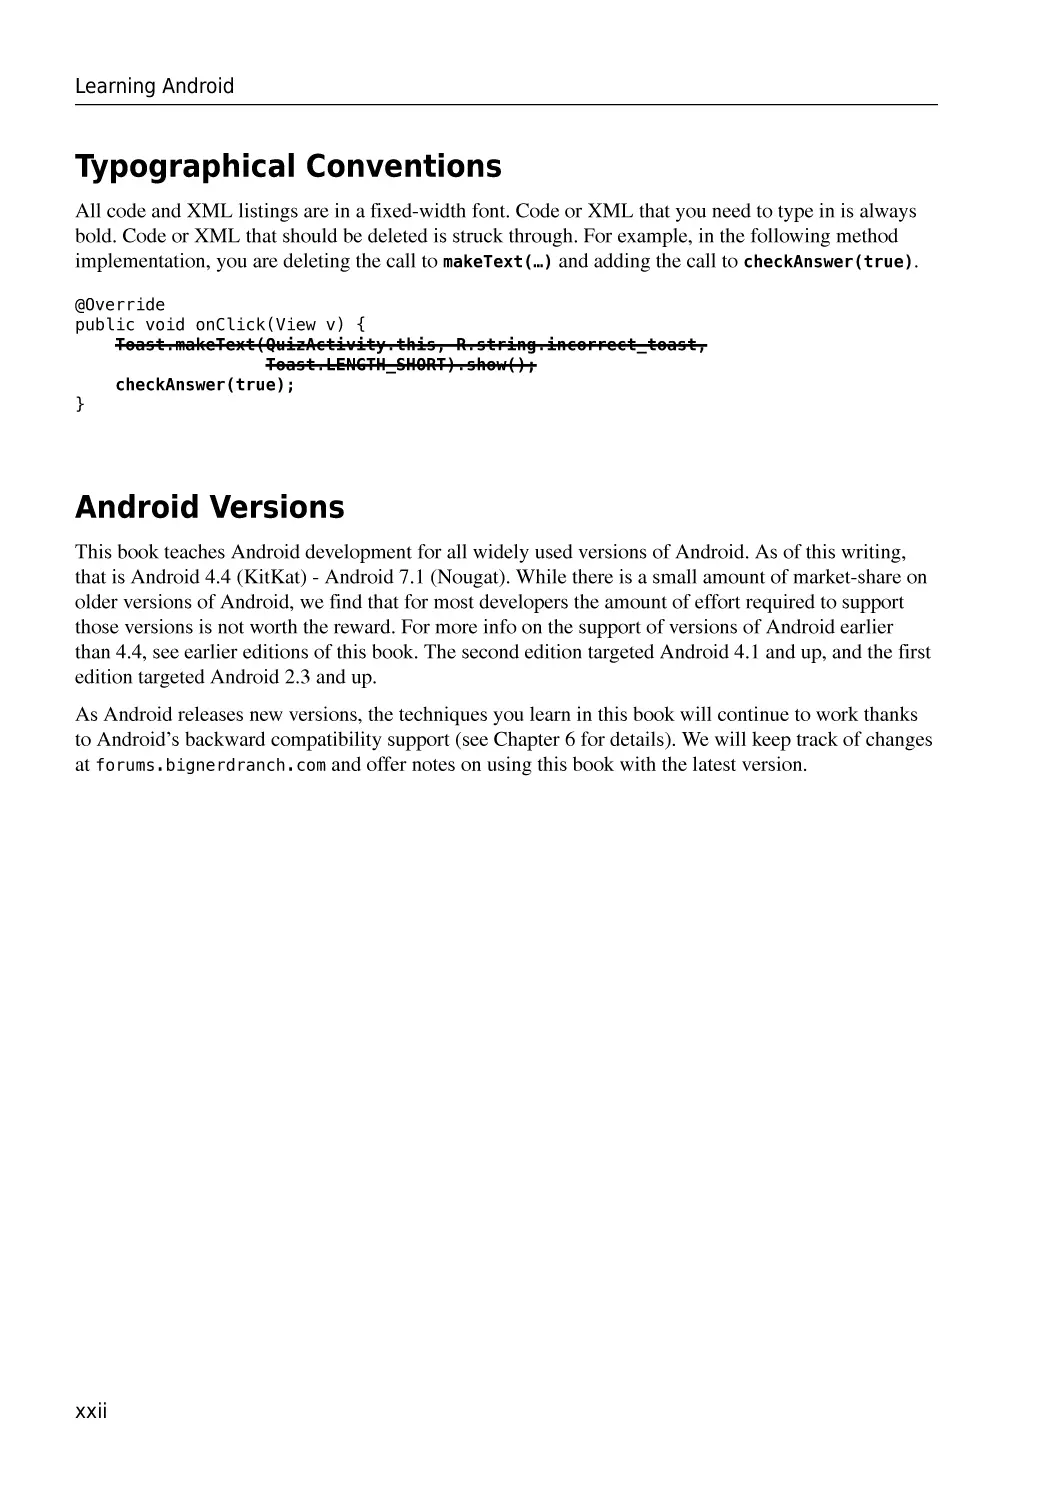 Typographical Conventions
Android Versions